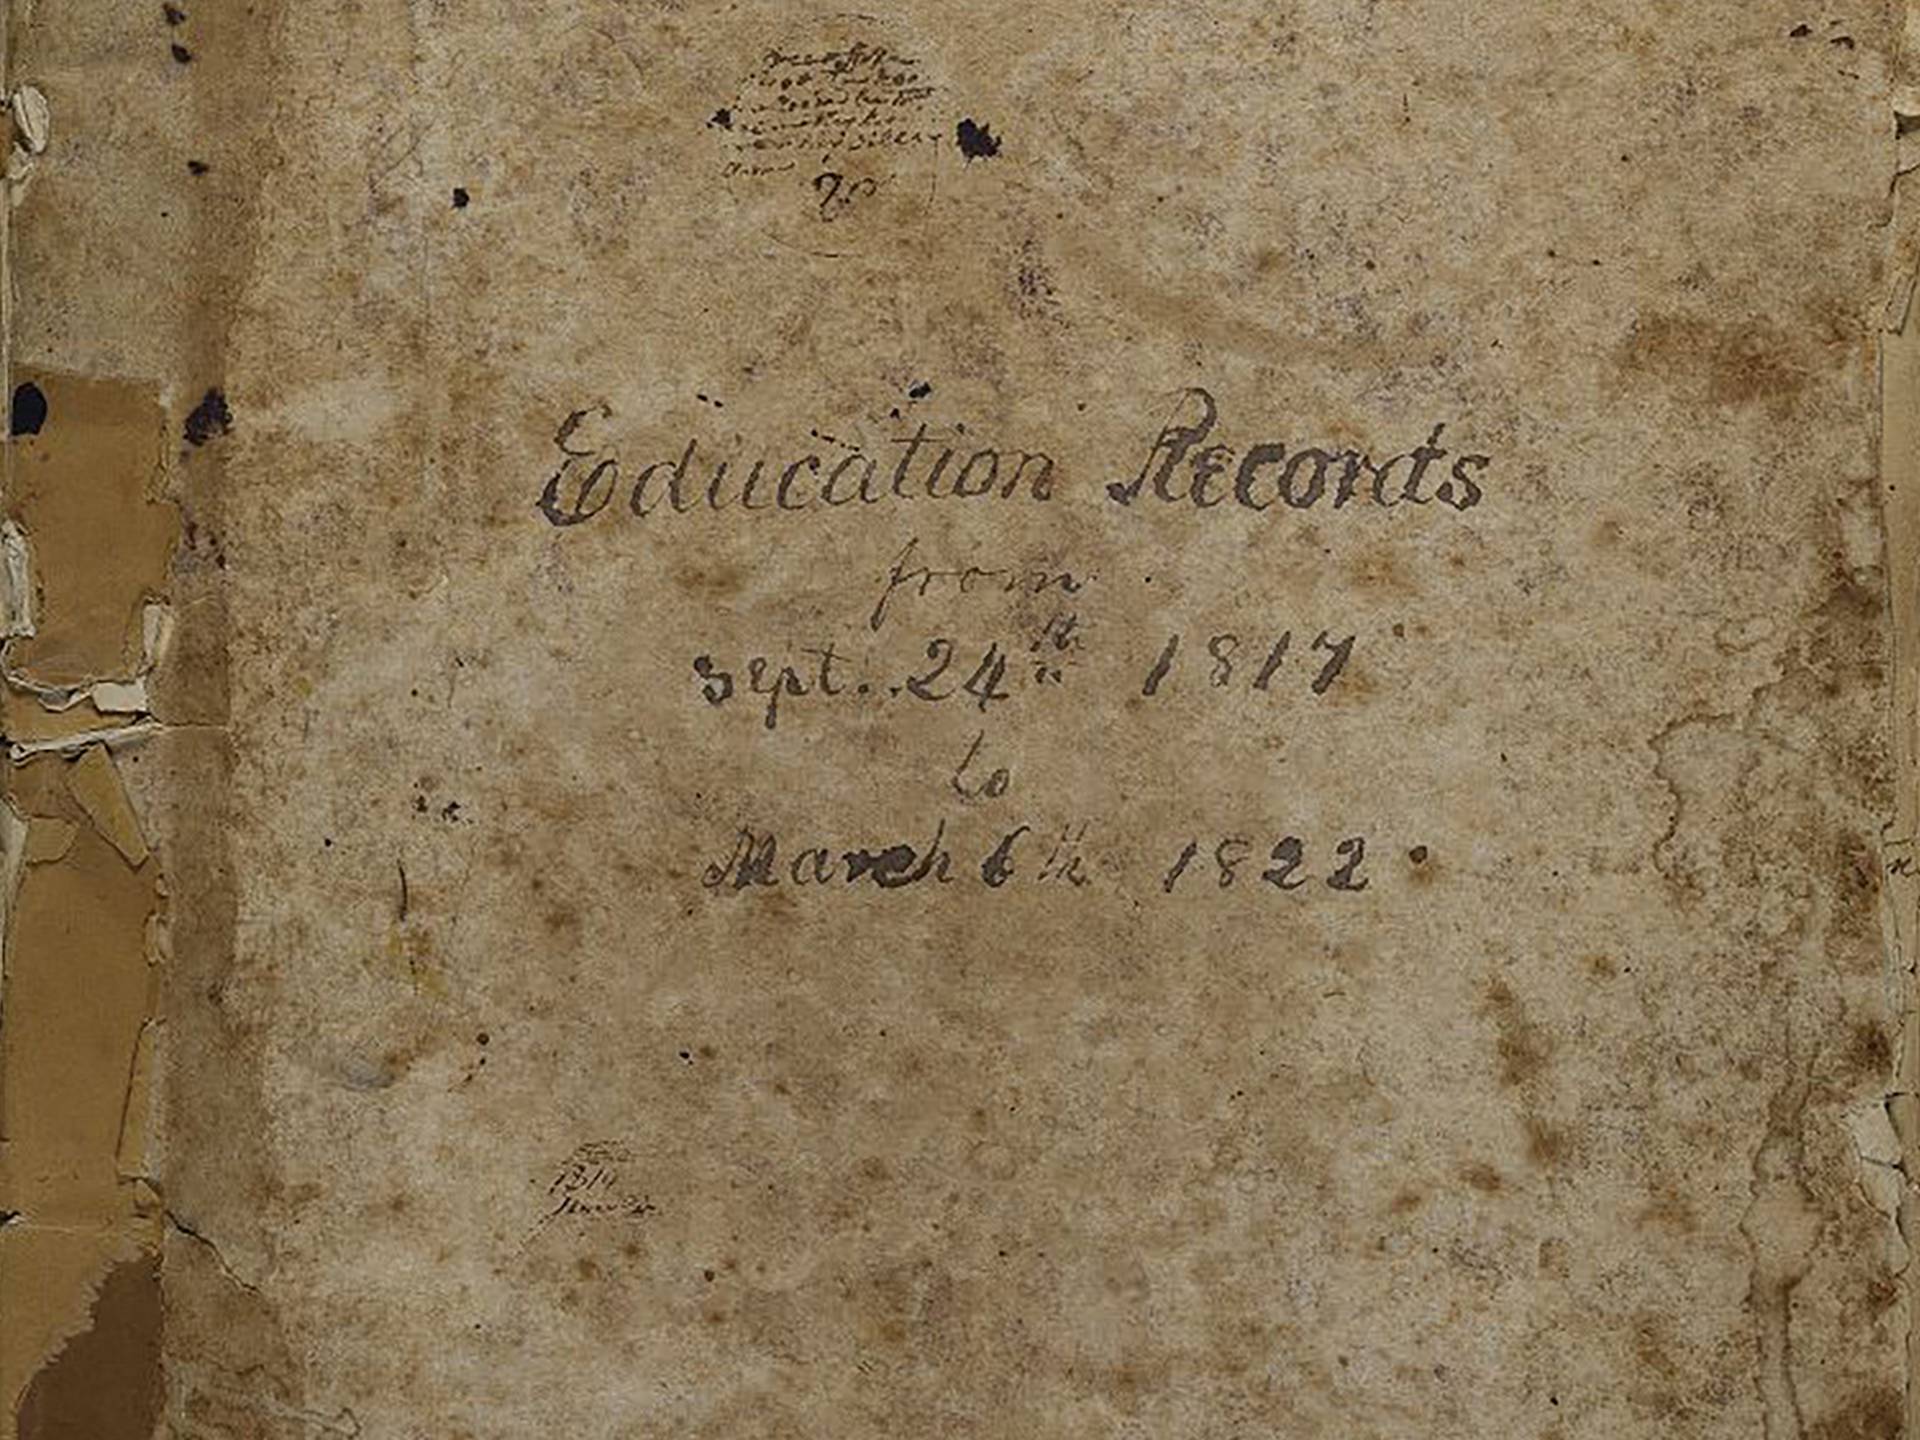 BESSNY Education Records ledger cover